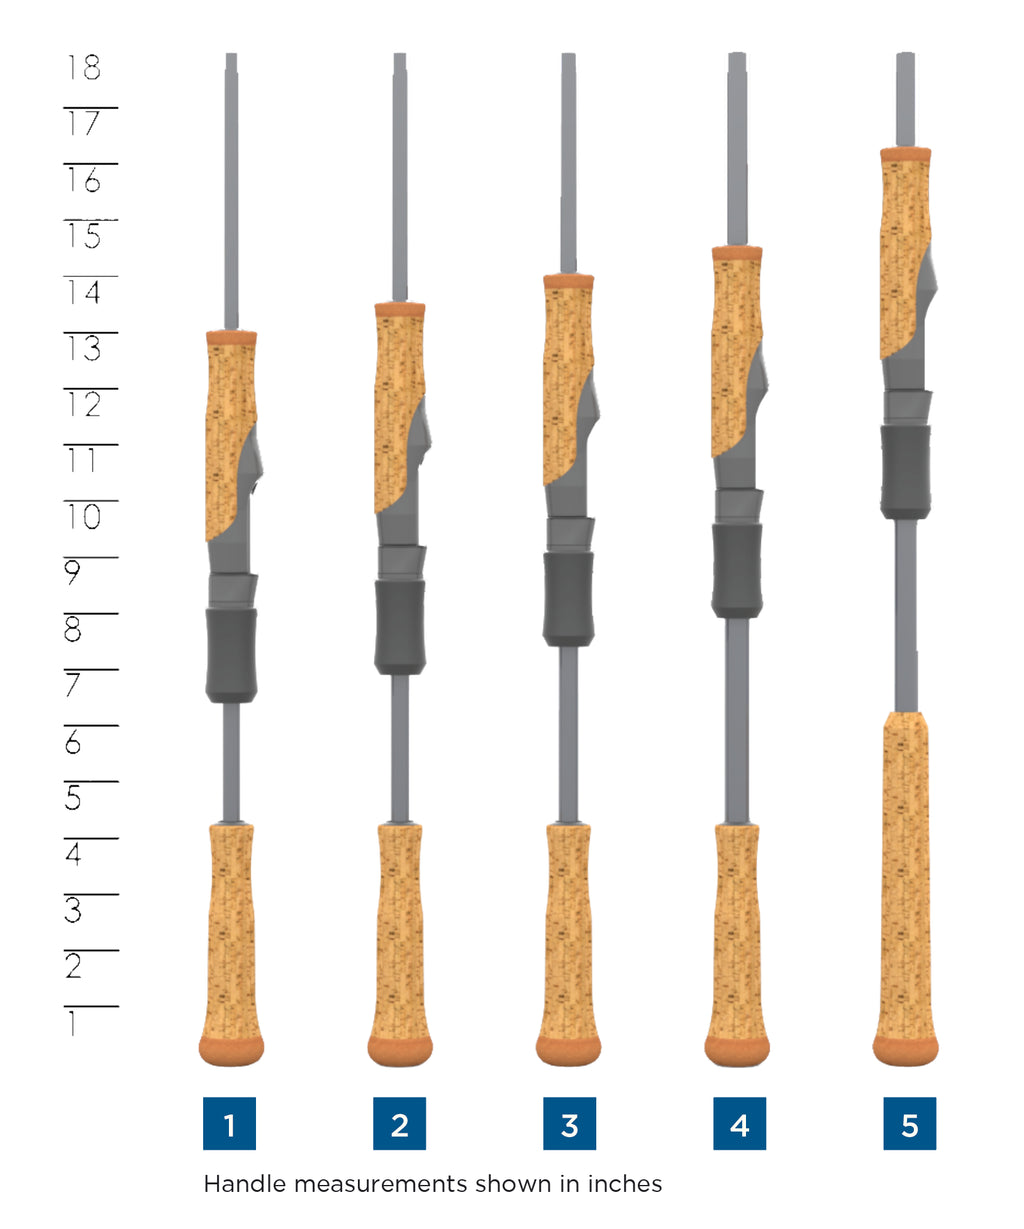 St.Croix Panfish Series Spinning Rods